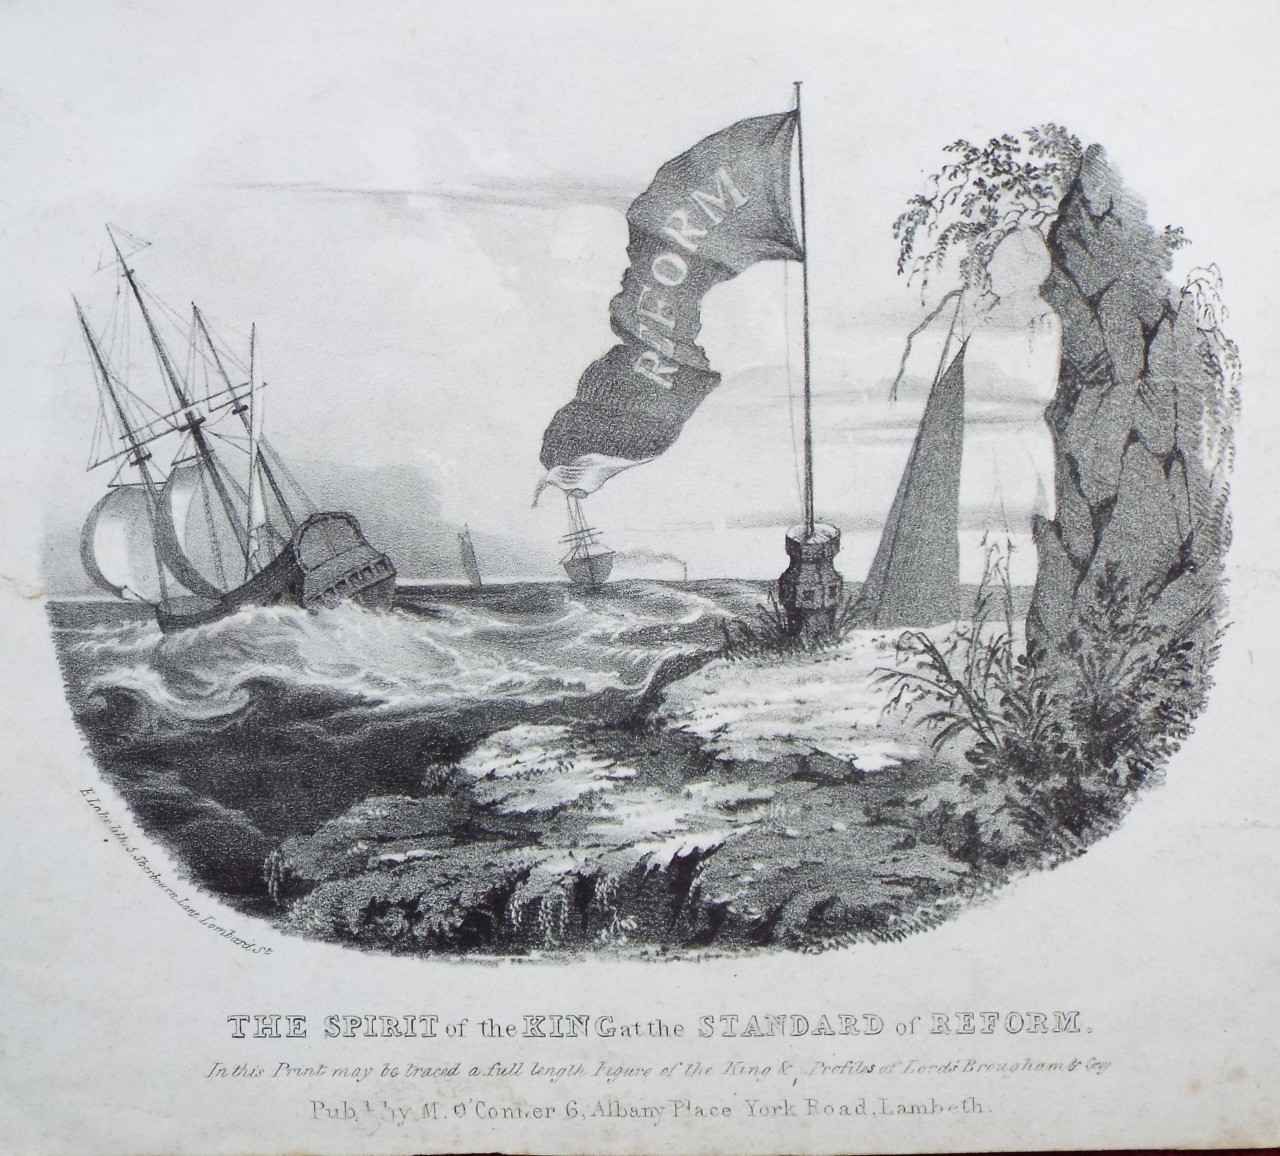 Lithograph - The Spirit of the King at the Standard of Reform.In this Print may be traced a full length Figure of the King & Profiles of Lord's Brougham & Gray.